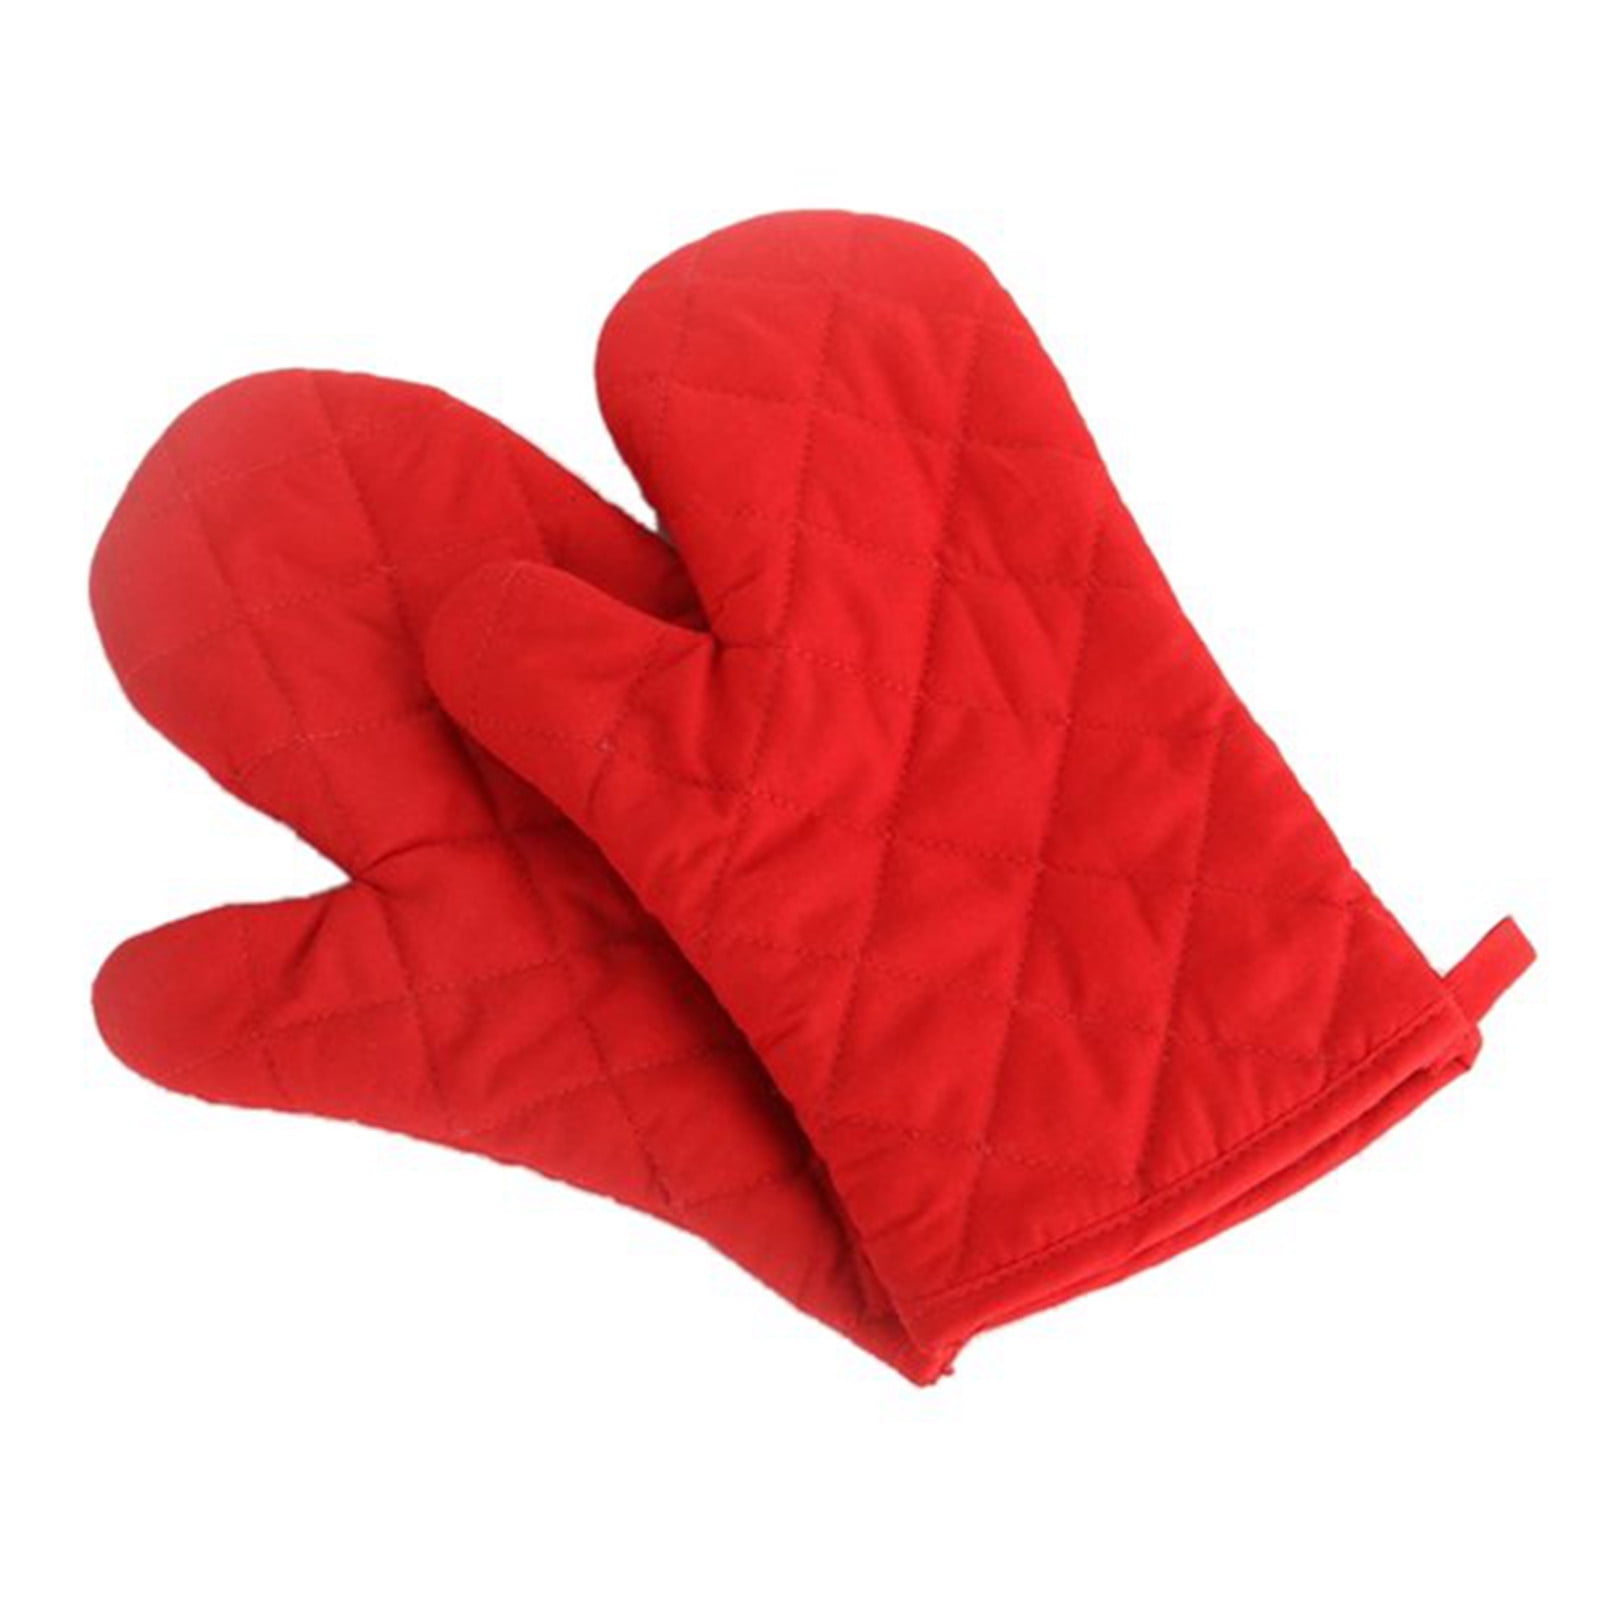 Oven Mitts Silicone Christmas Oven Gloves 500°F Heat Resistant